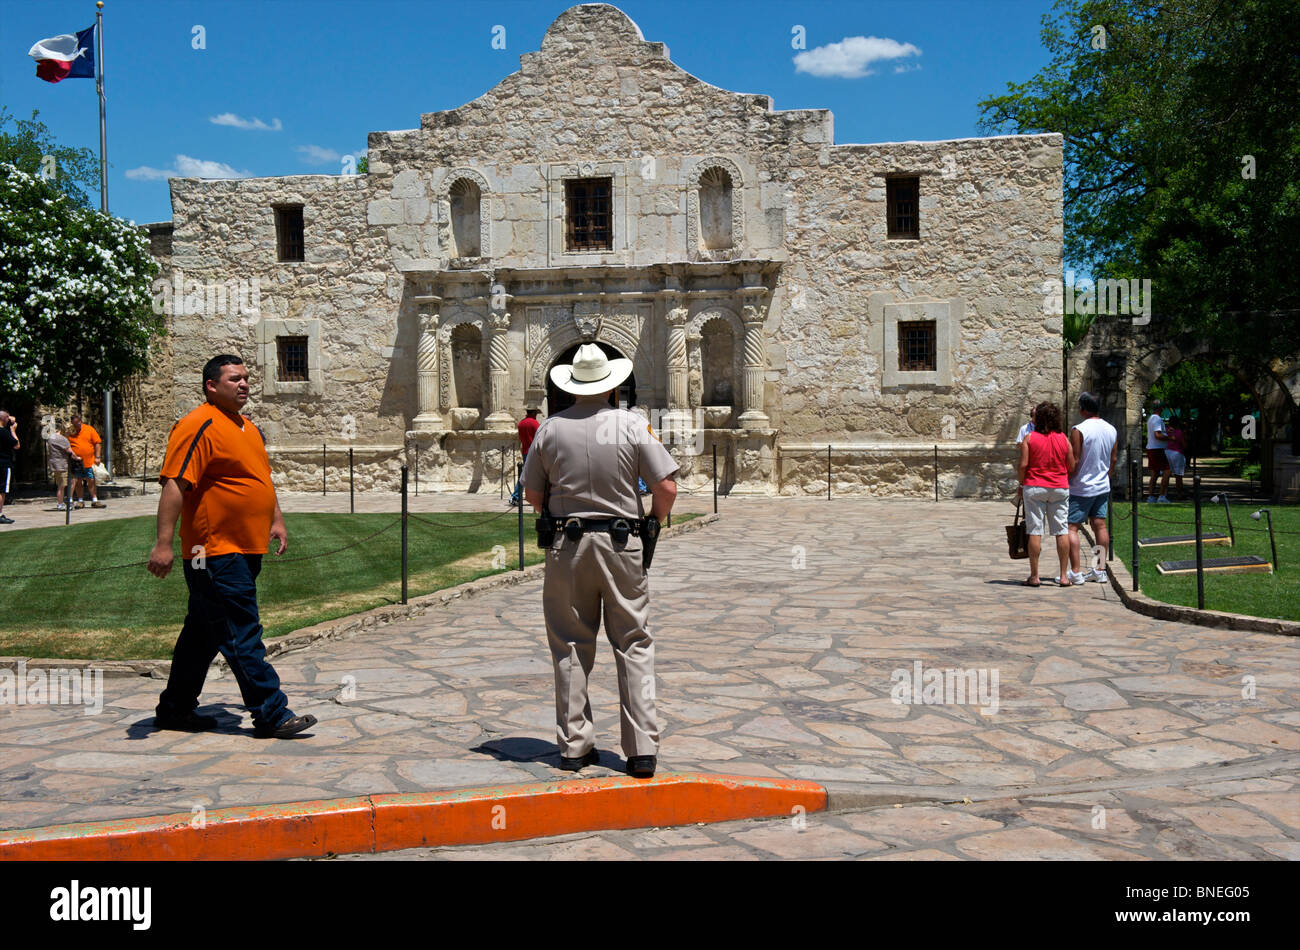 Police officer guarding ancient Alamo Symbol of Texas’s Independence in Texas San Antonio, USA Stock Photo